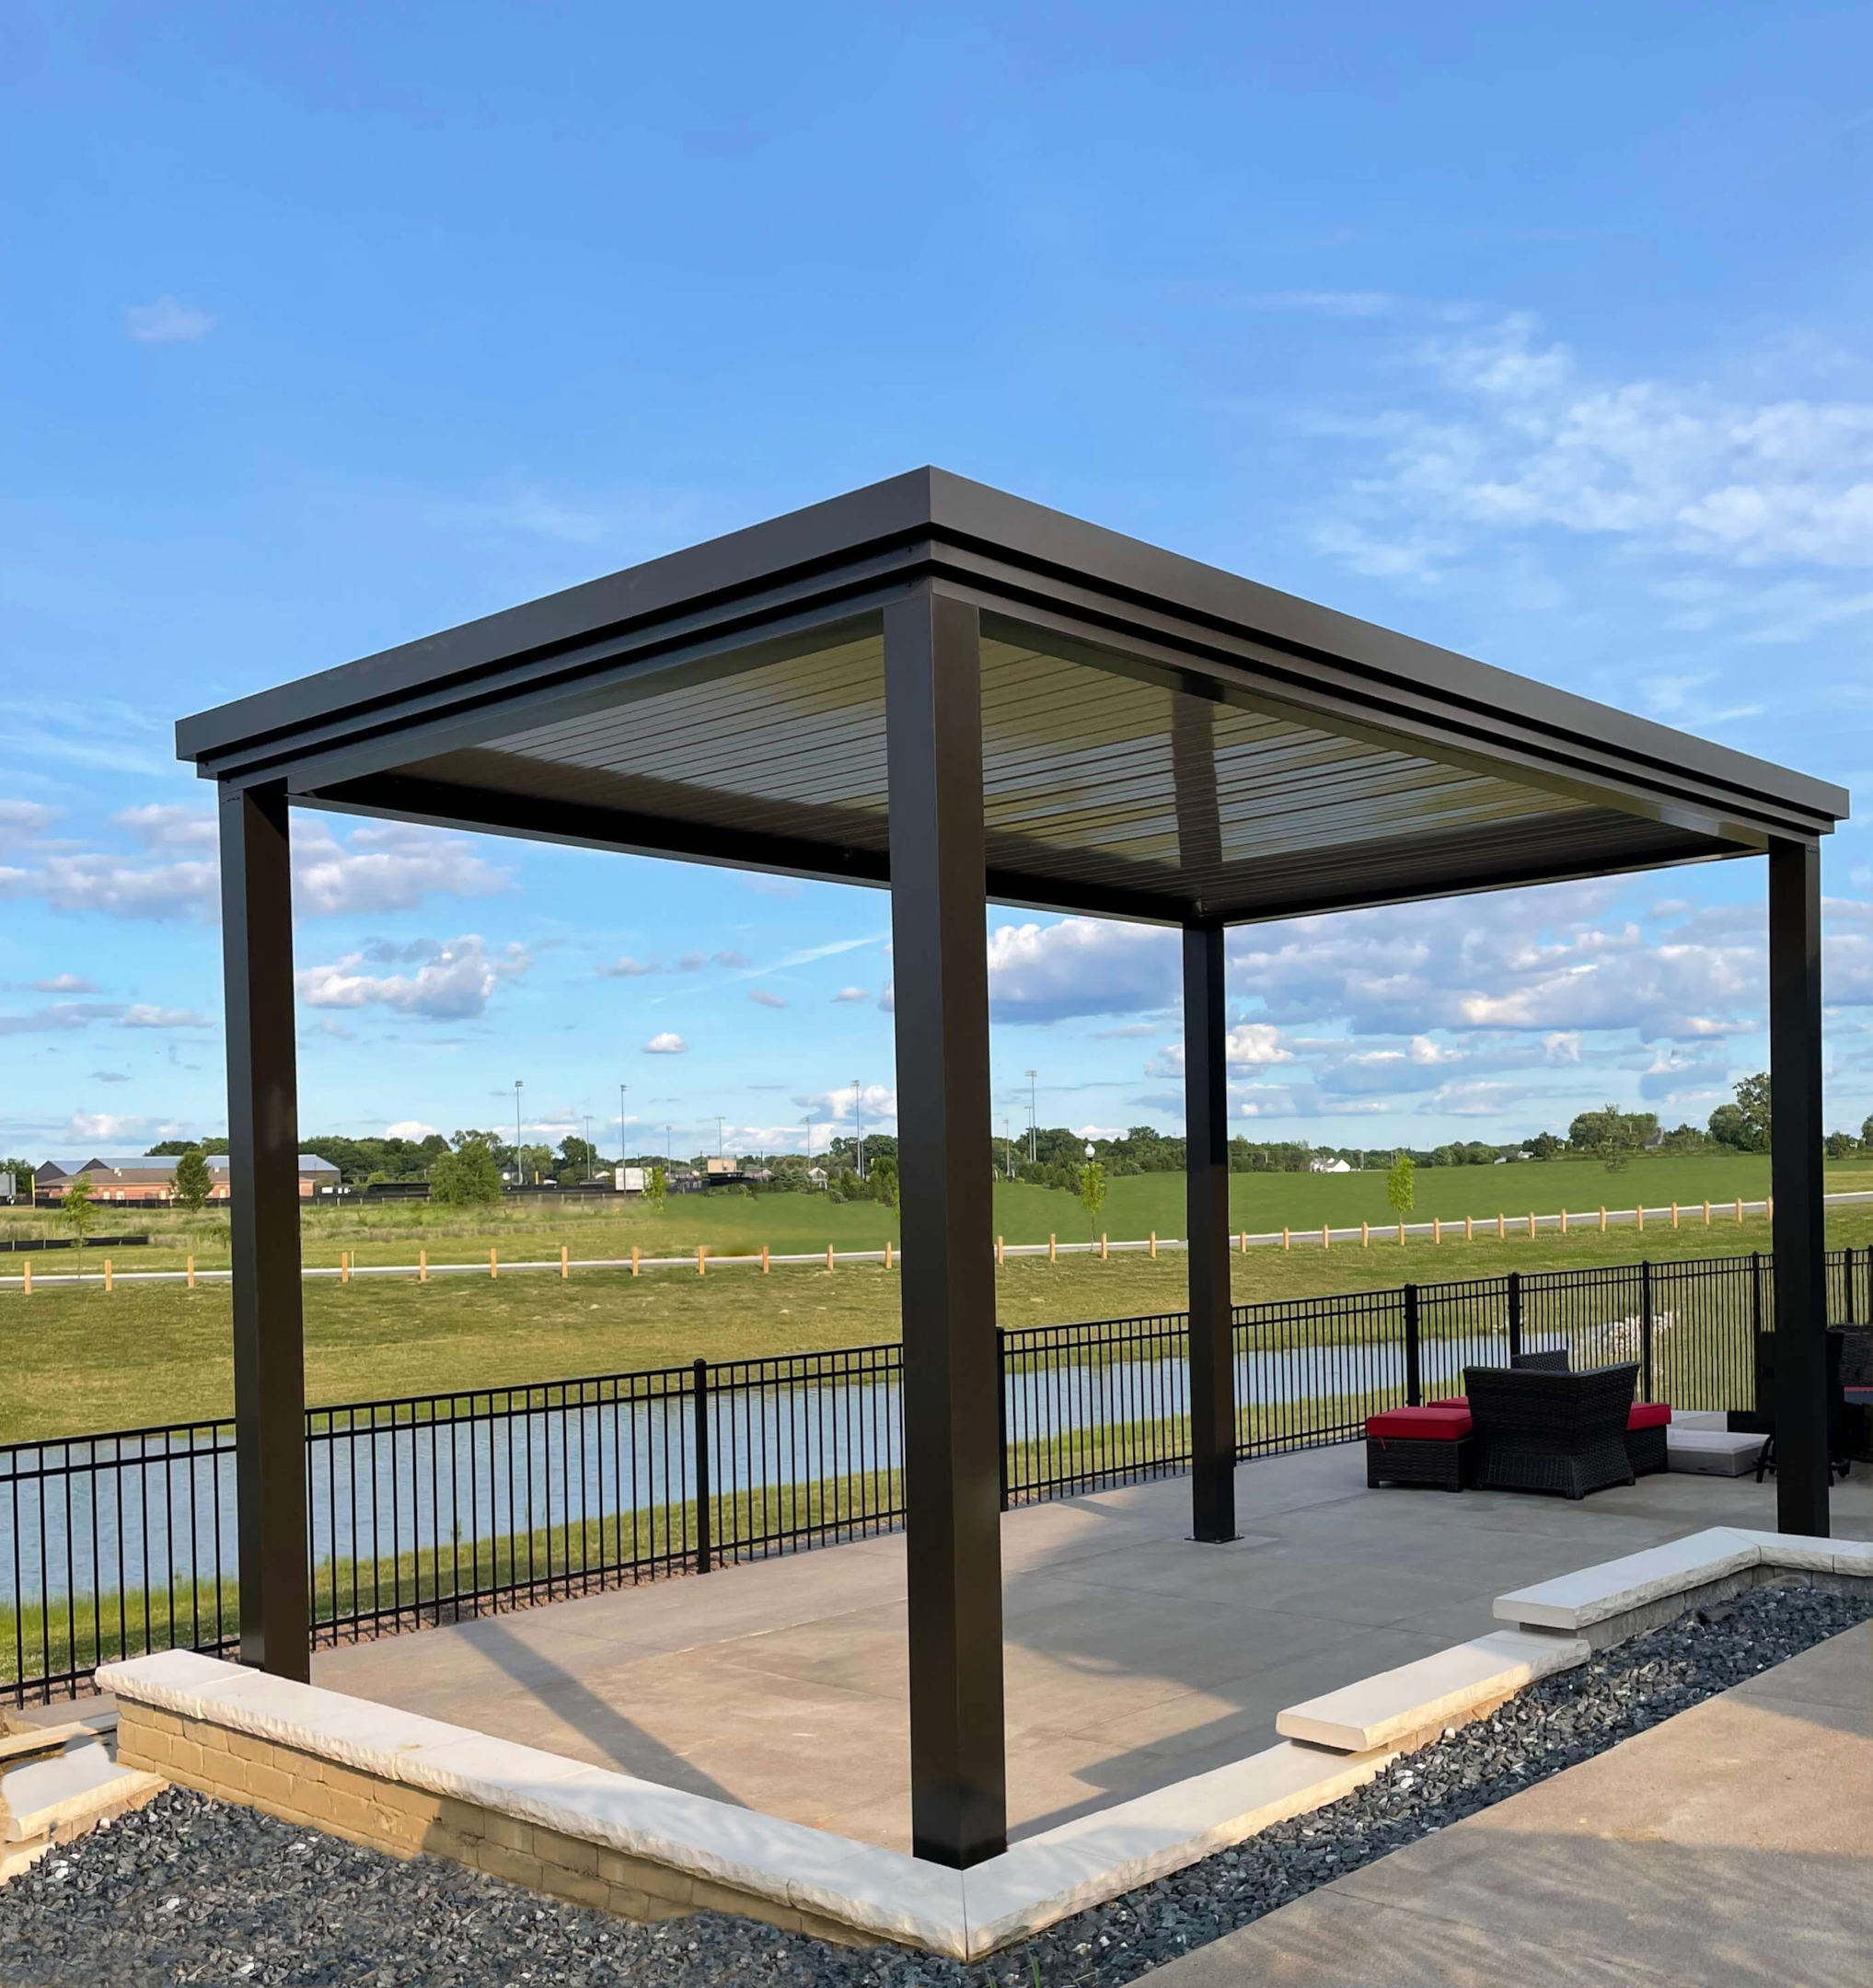 A well designed pergola with partial shade can be just enough to keep you comfortable.  Certain weather conditions will dictate how much sun or shade is needed.